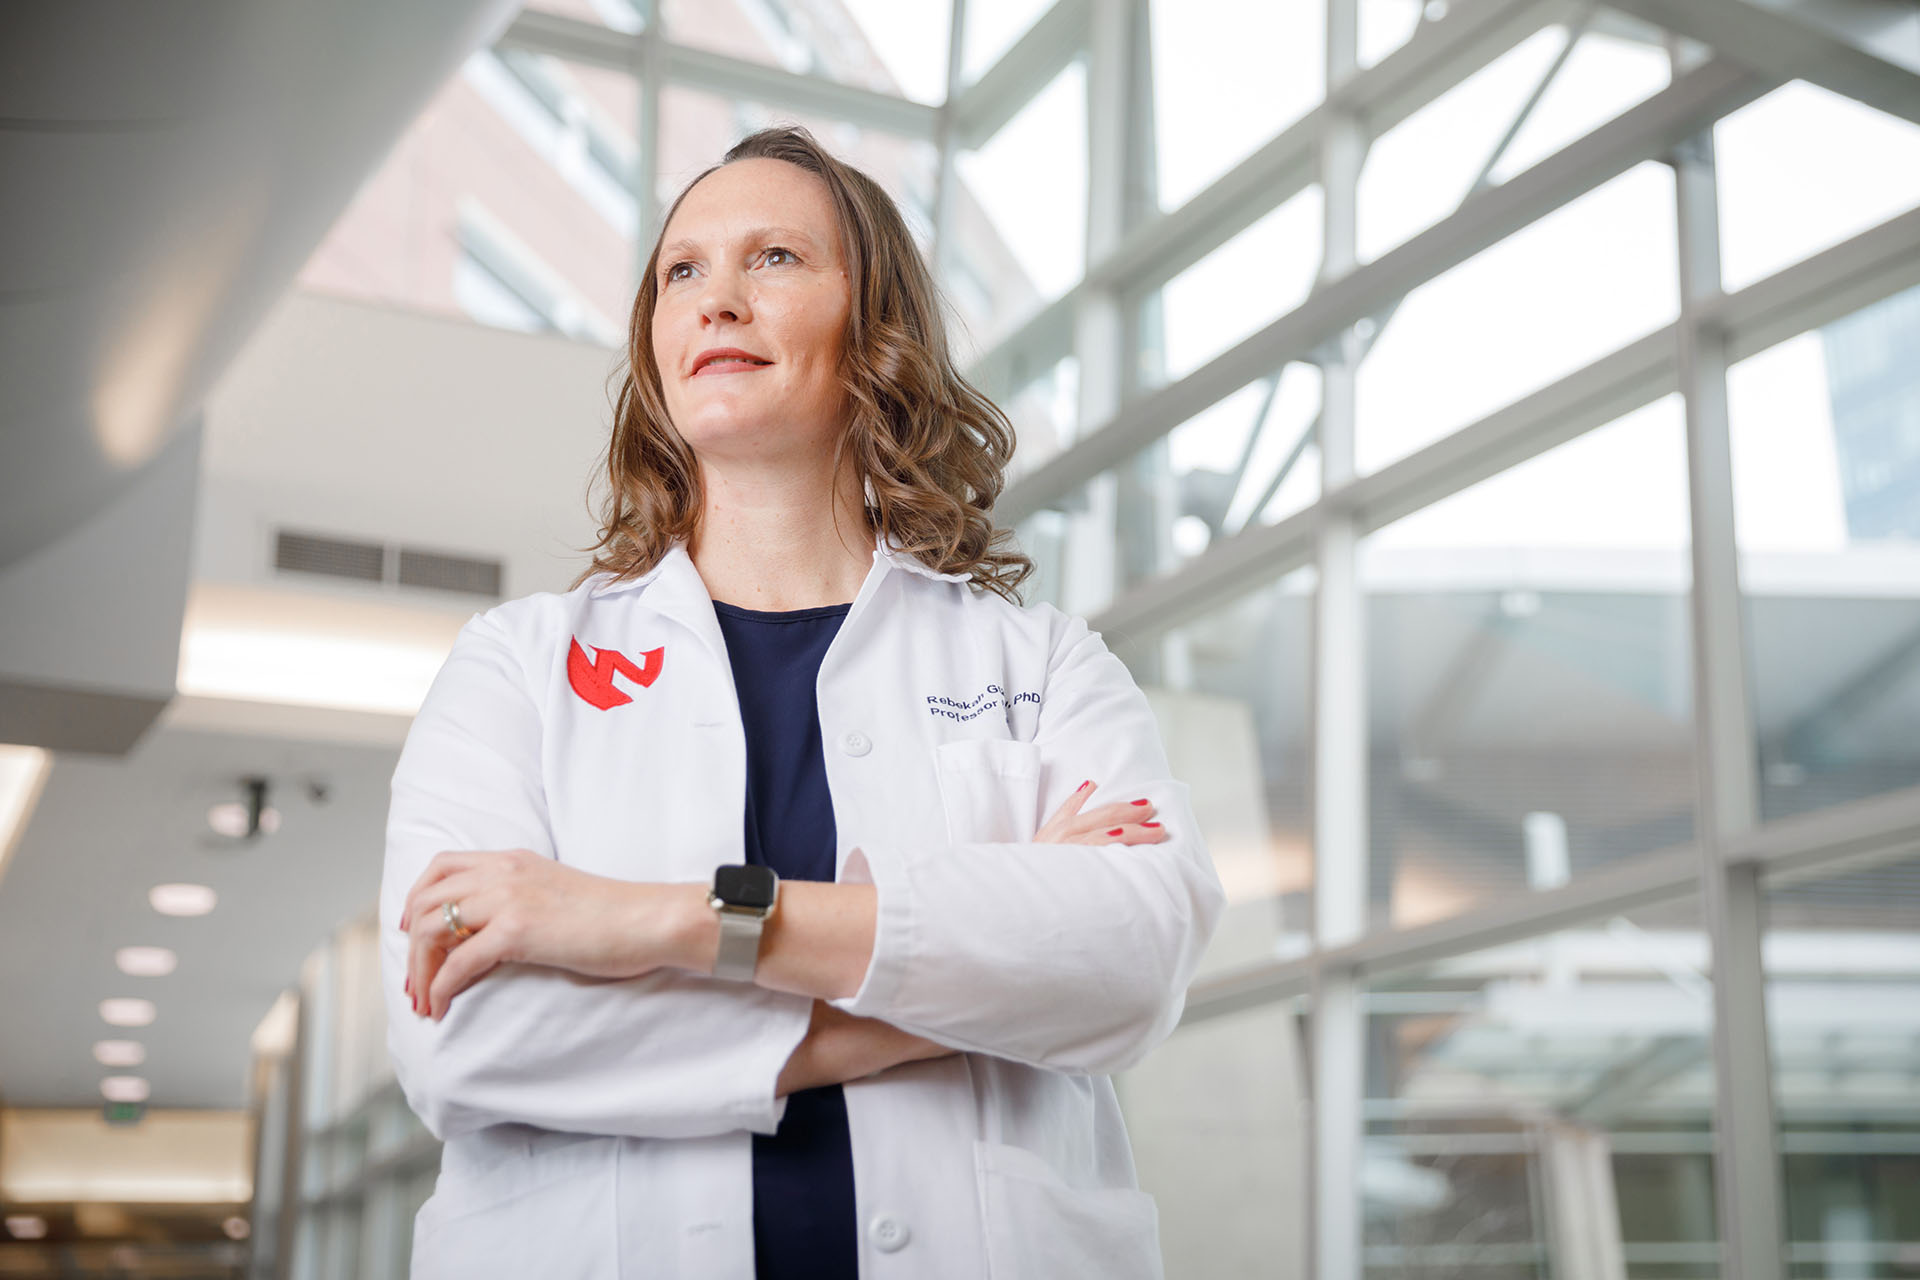 The National Institutes of Health recently awarded more than &dollar;11&period;8 million to UNMC&apos;s Center for Heart and Vascular Research&comma; under the direction of principal investigator Rebekah Gundry&comma; PhD&comma; to create a Centers of Biomedical Research Excellence focused on finding answers for heart and vascular diseases&period;